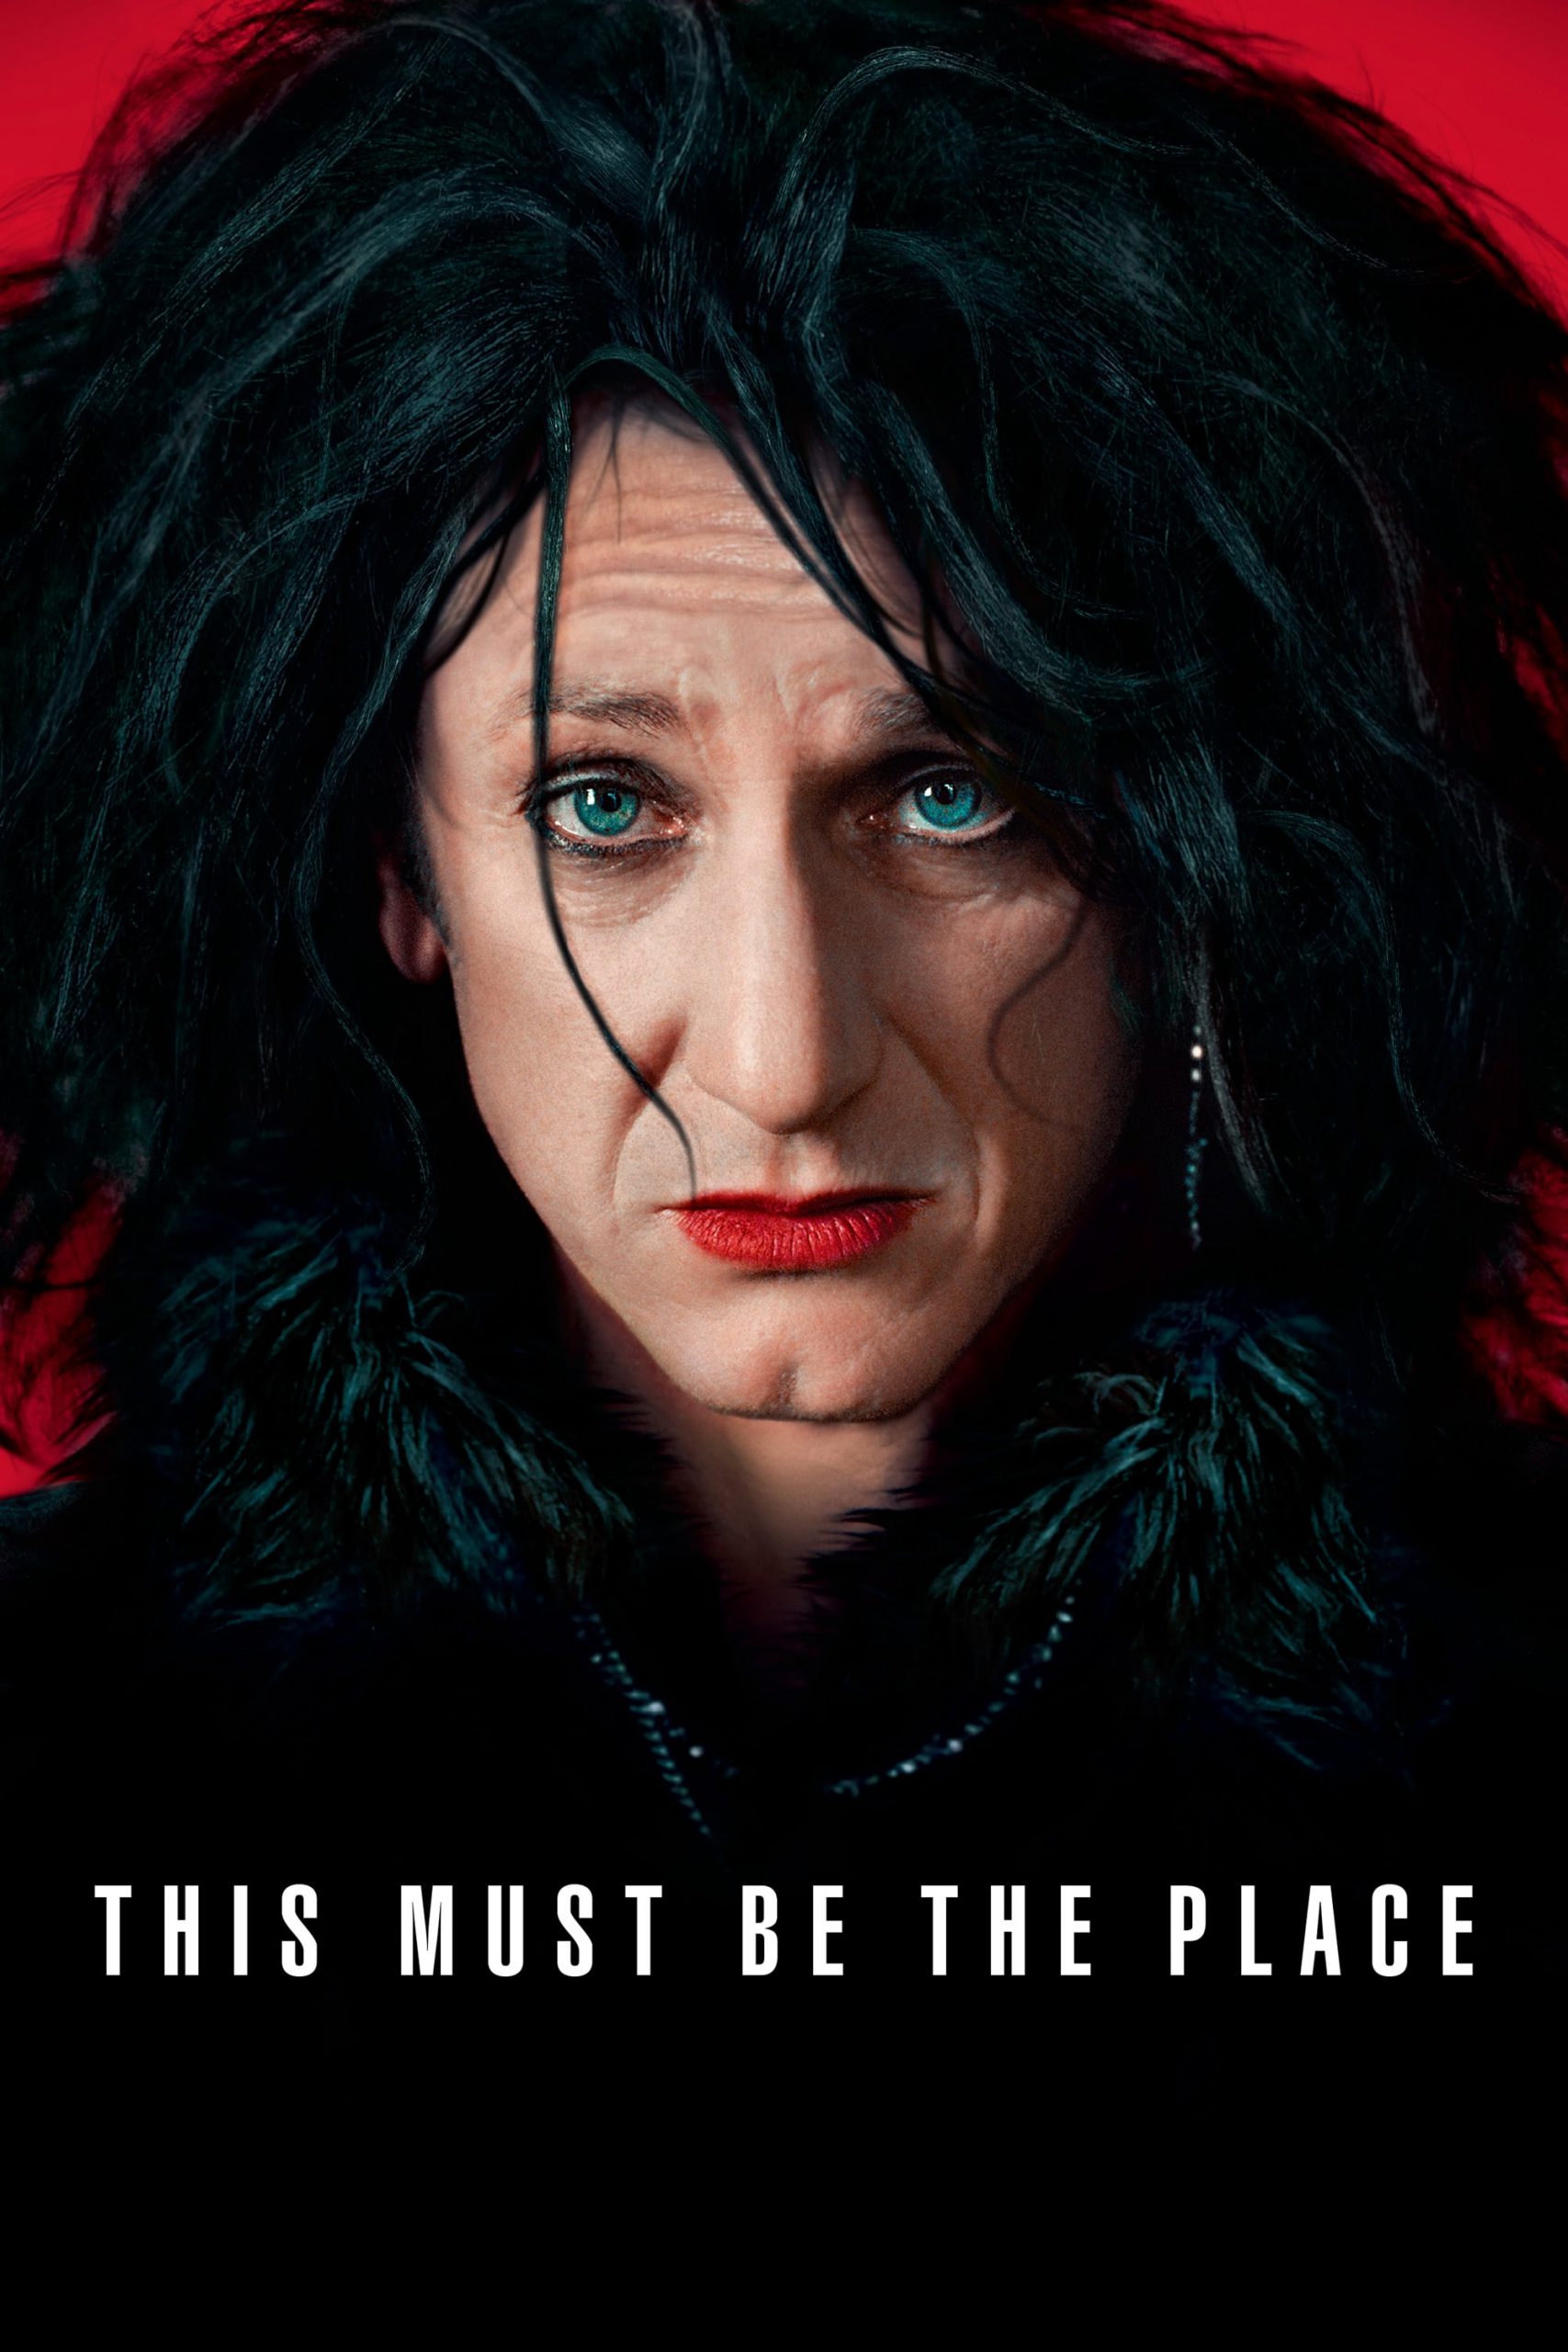 This must be the place [HD] (2011)